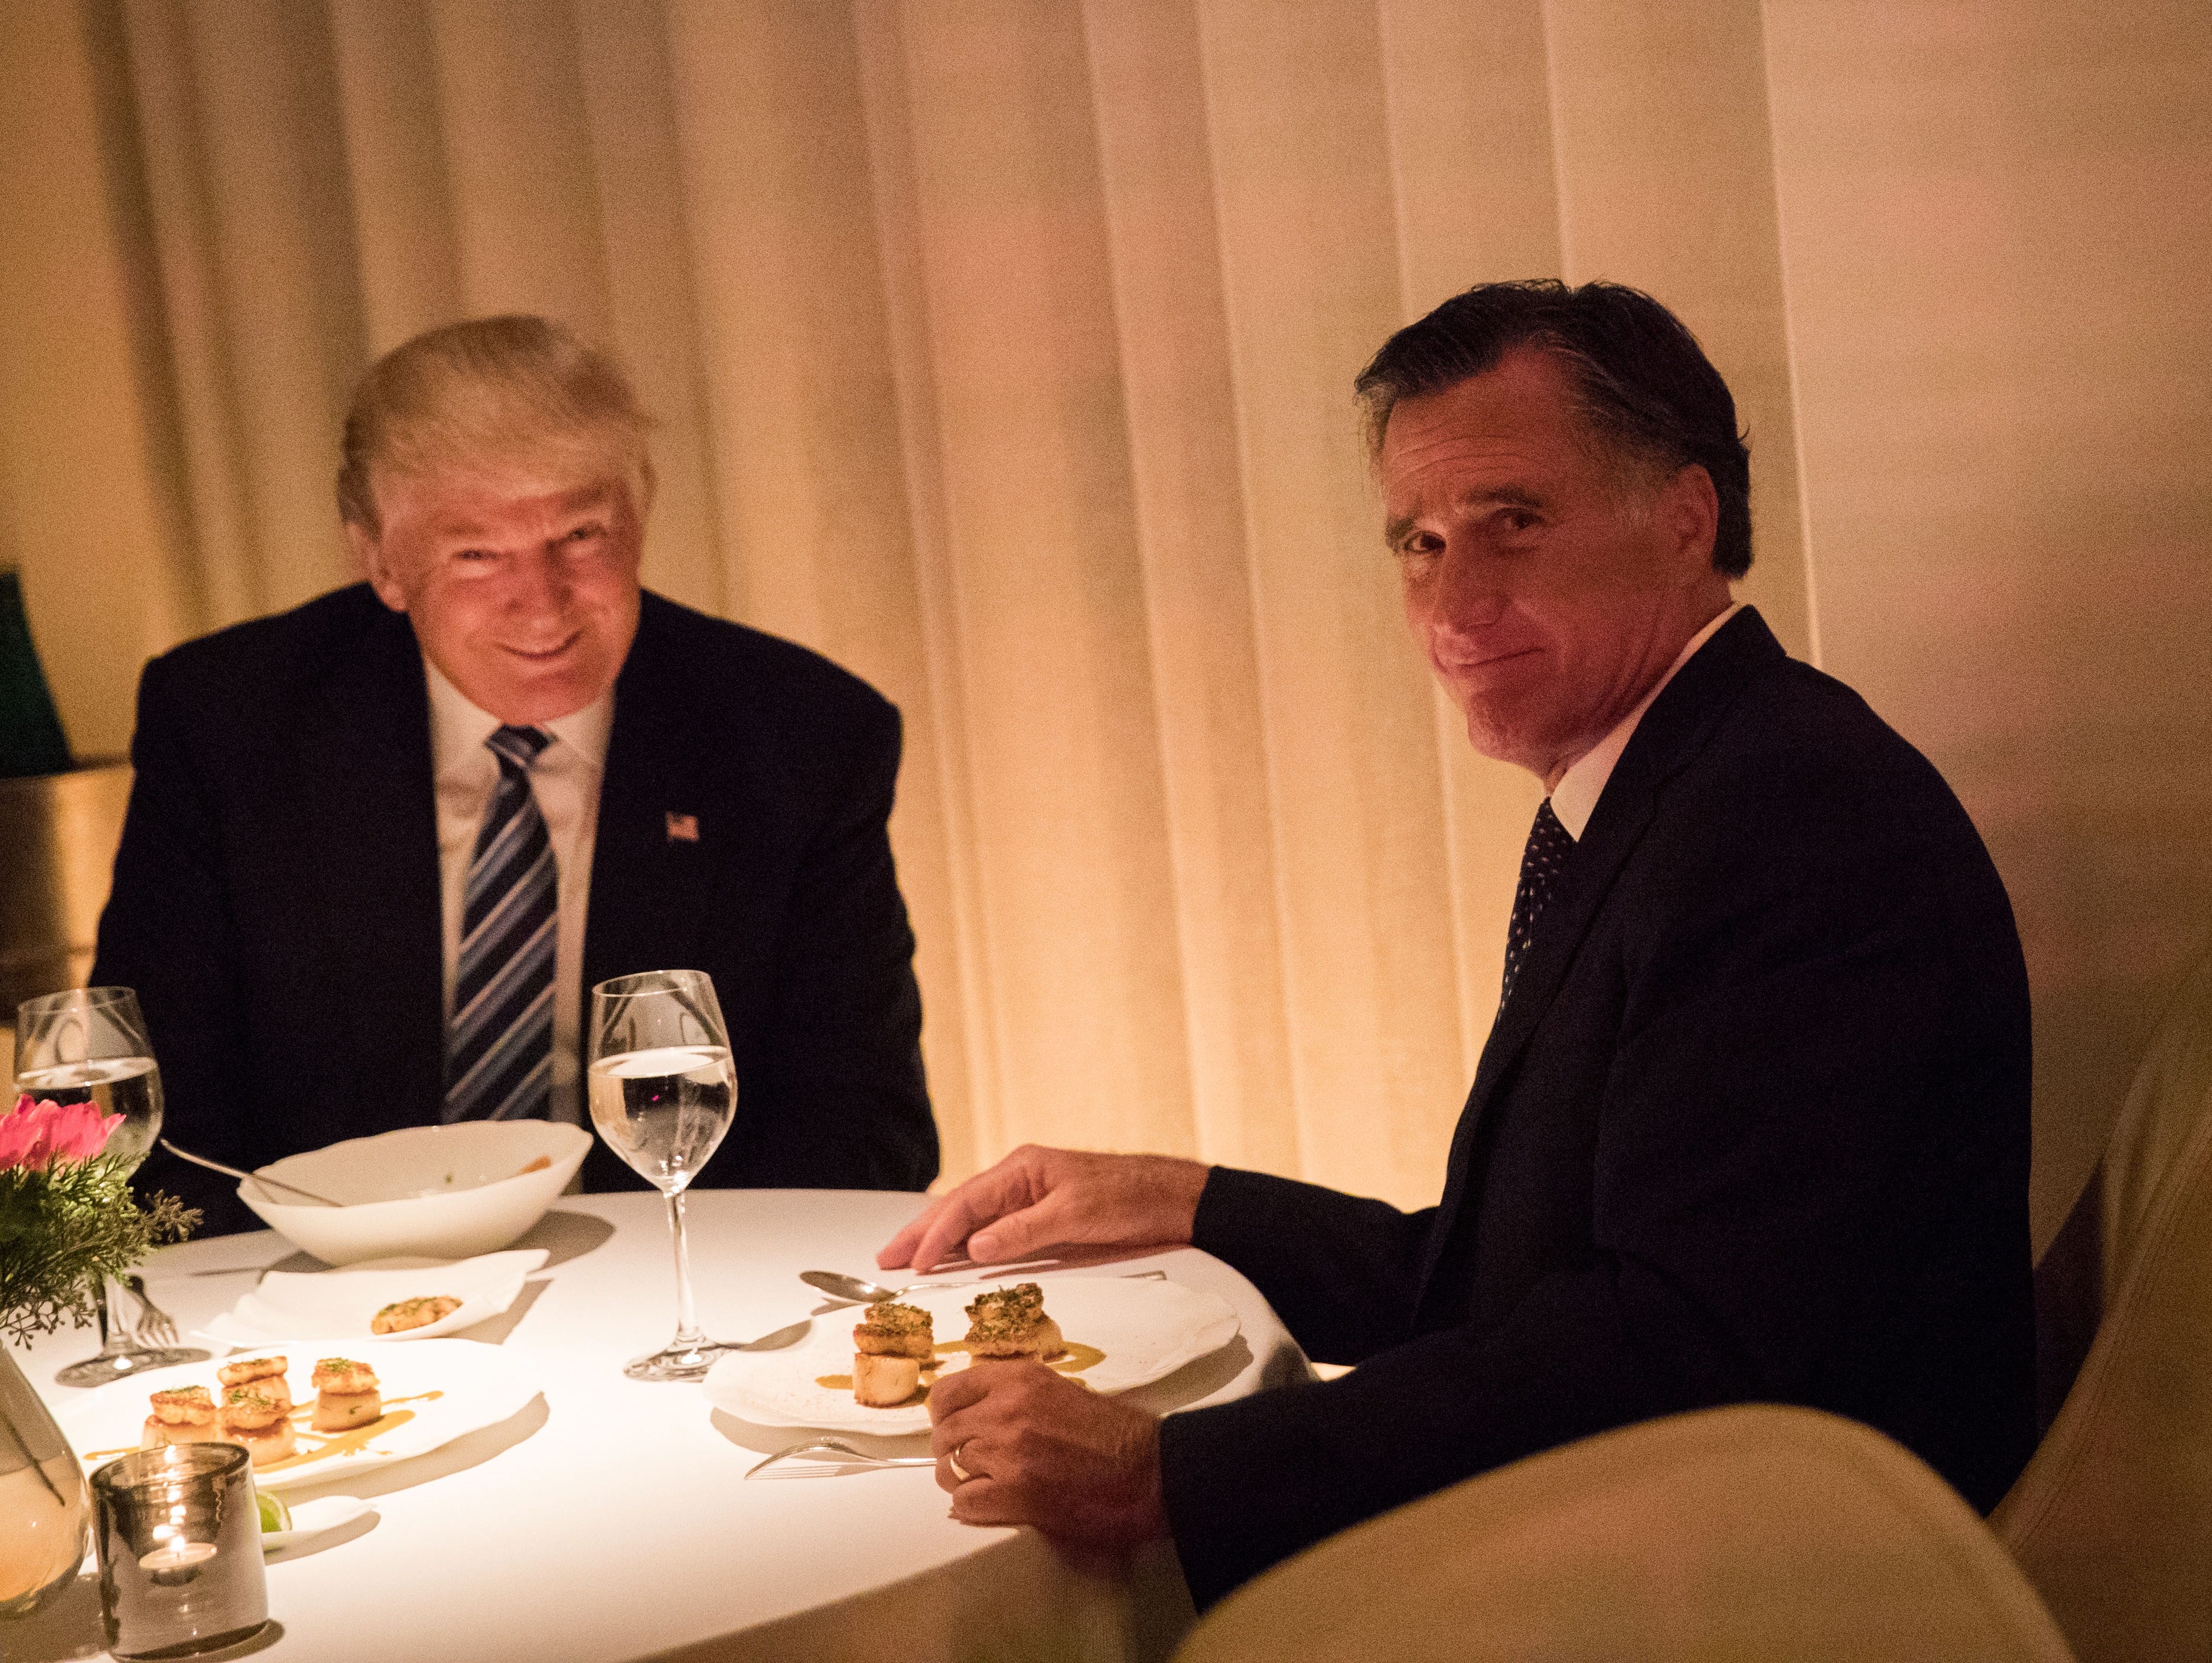 President-elect Trump and Mitt Romney dine at Jean Georges restaurant in New York City as Trump and his transition team are in the process of filling cabinet and other high level positions for the new administration.